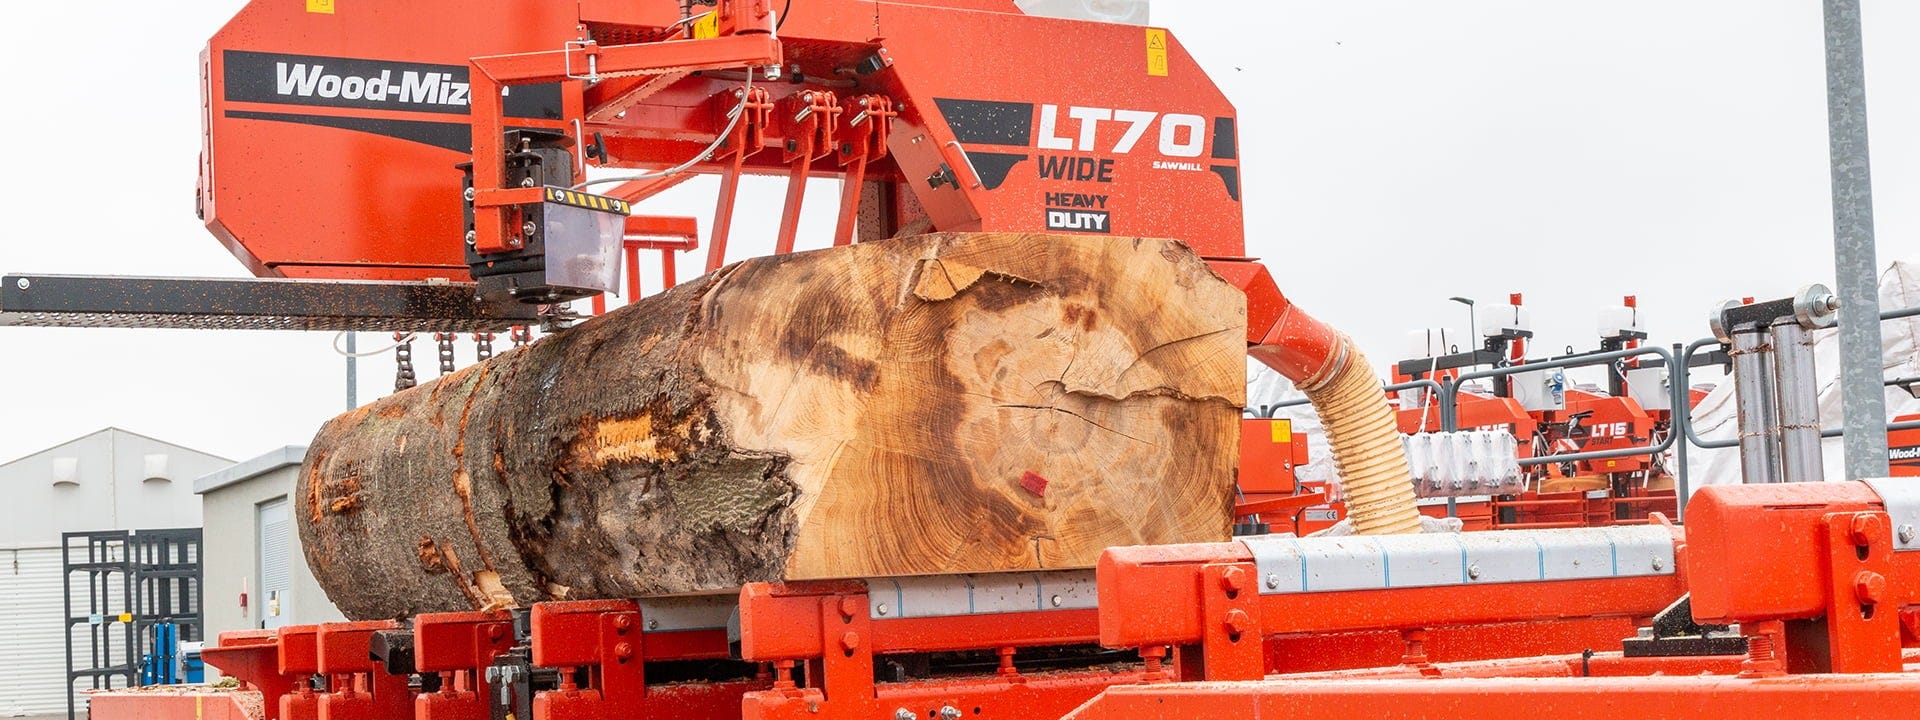 Focus on Productivity - LT70 HD and EG300 in a Sawmilling Line